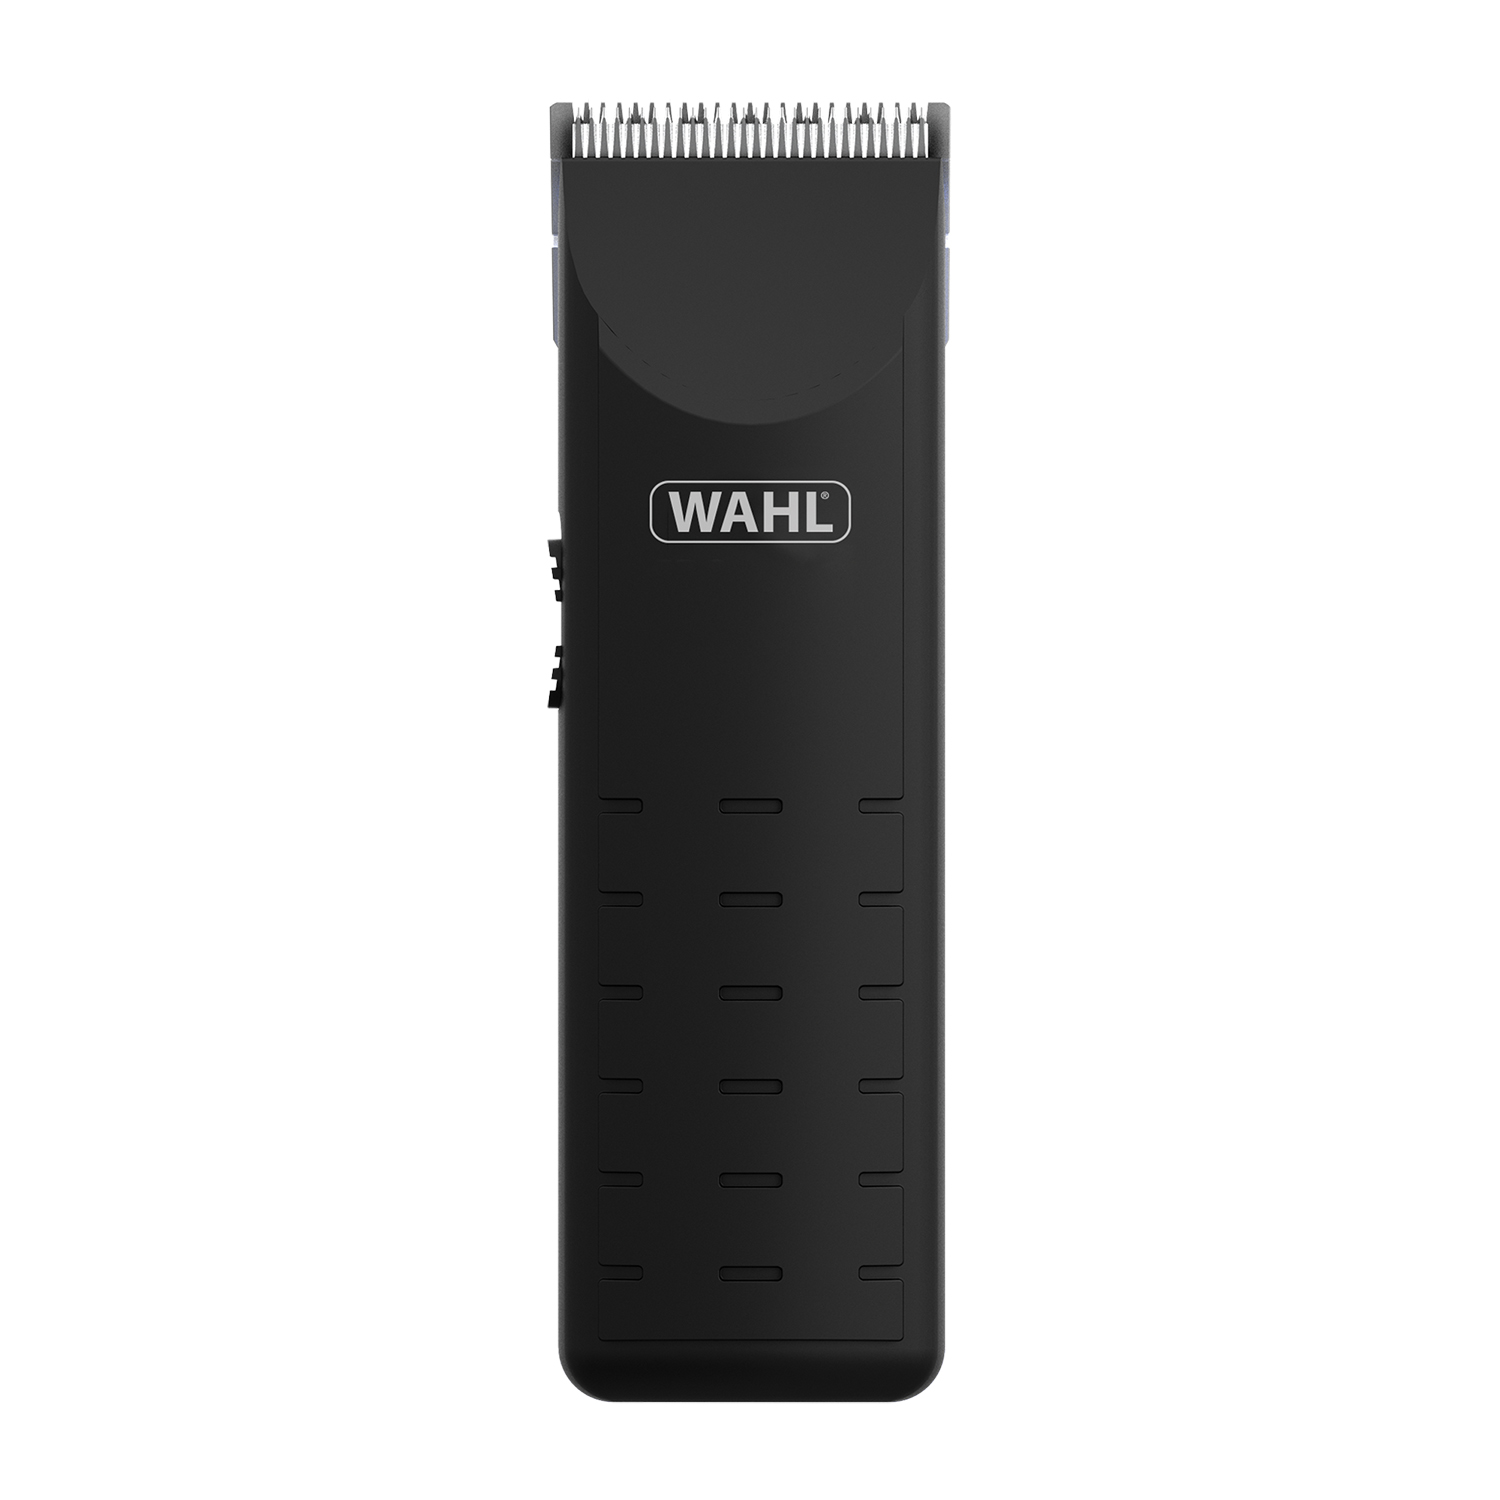 wahl pro series rechargeable clippers